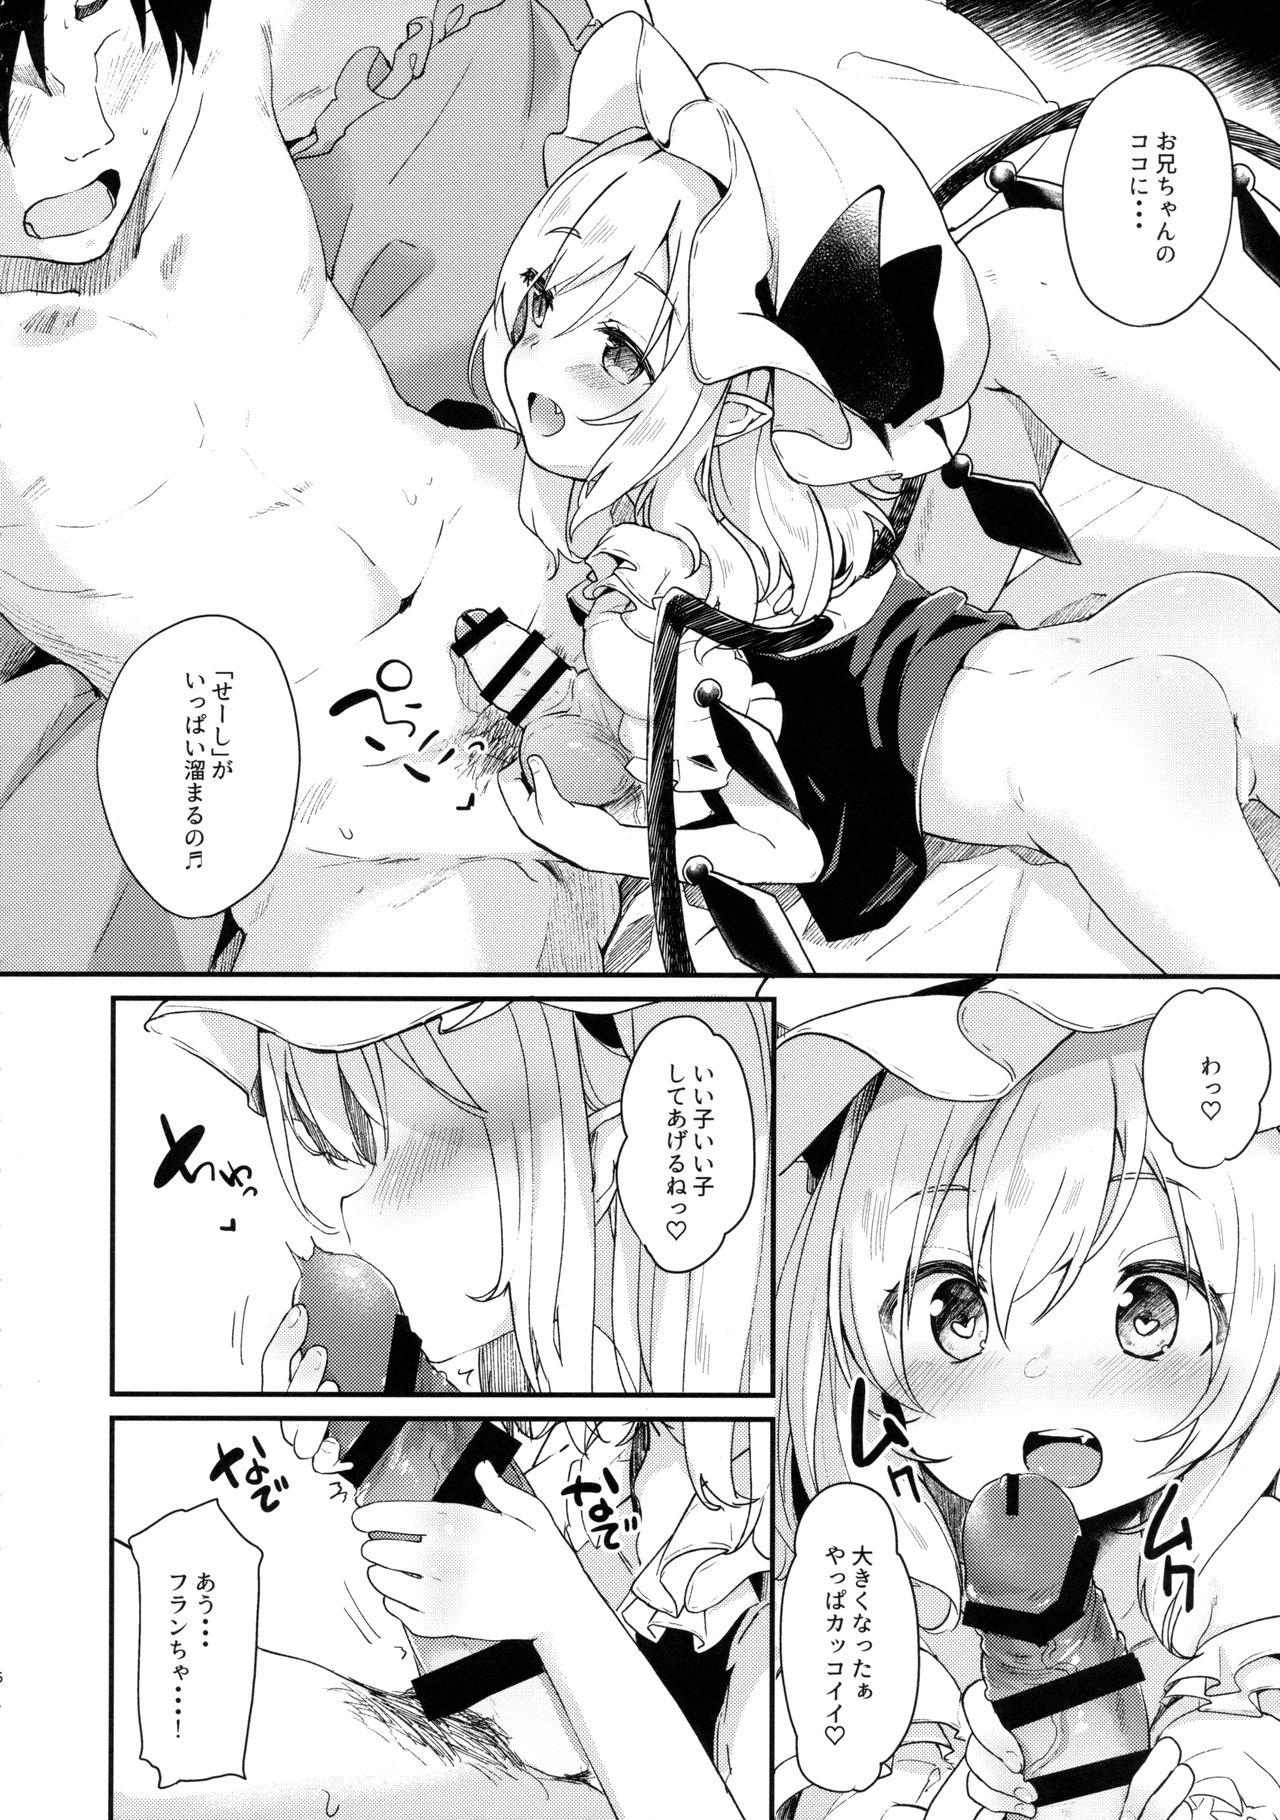 Gape FLANEX - Touhou project Spooning - Page 5